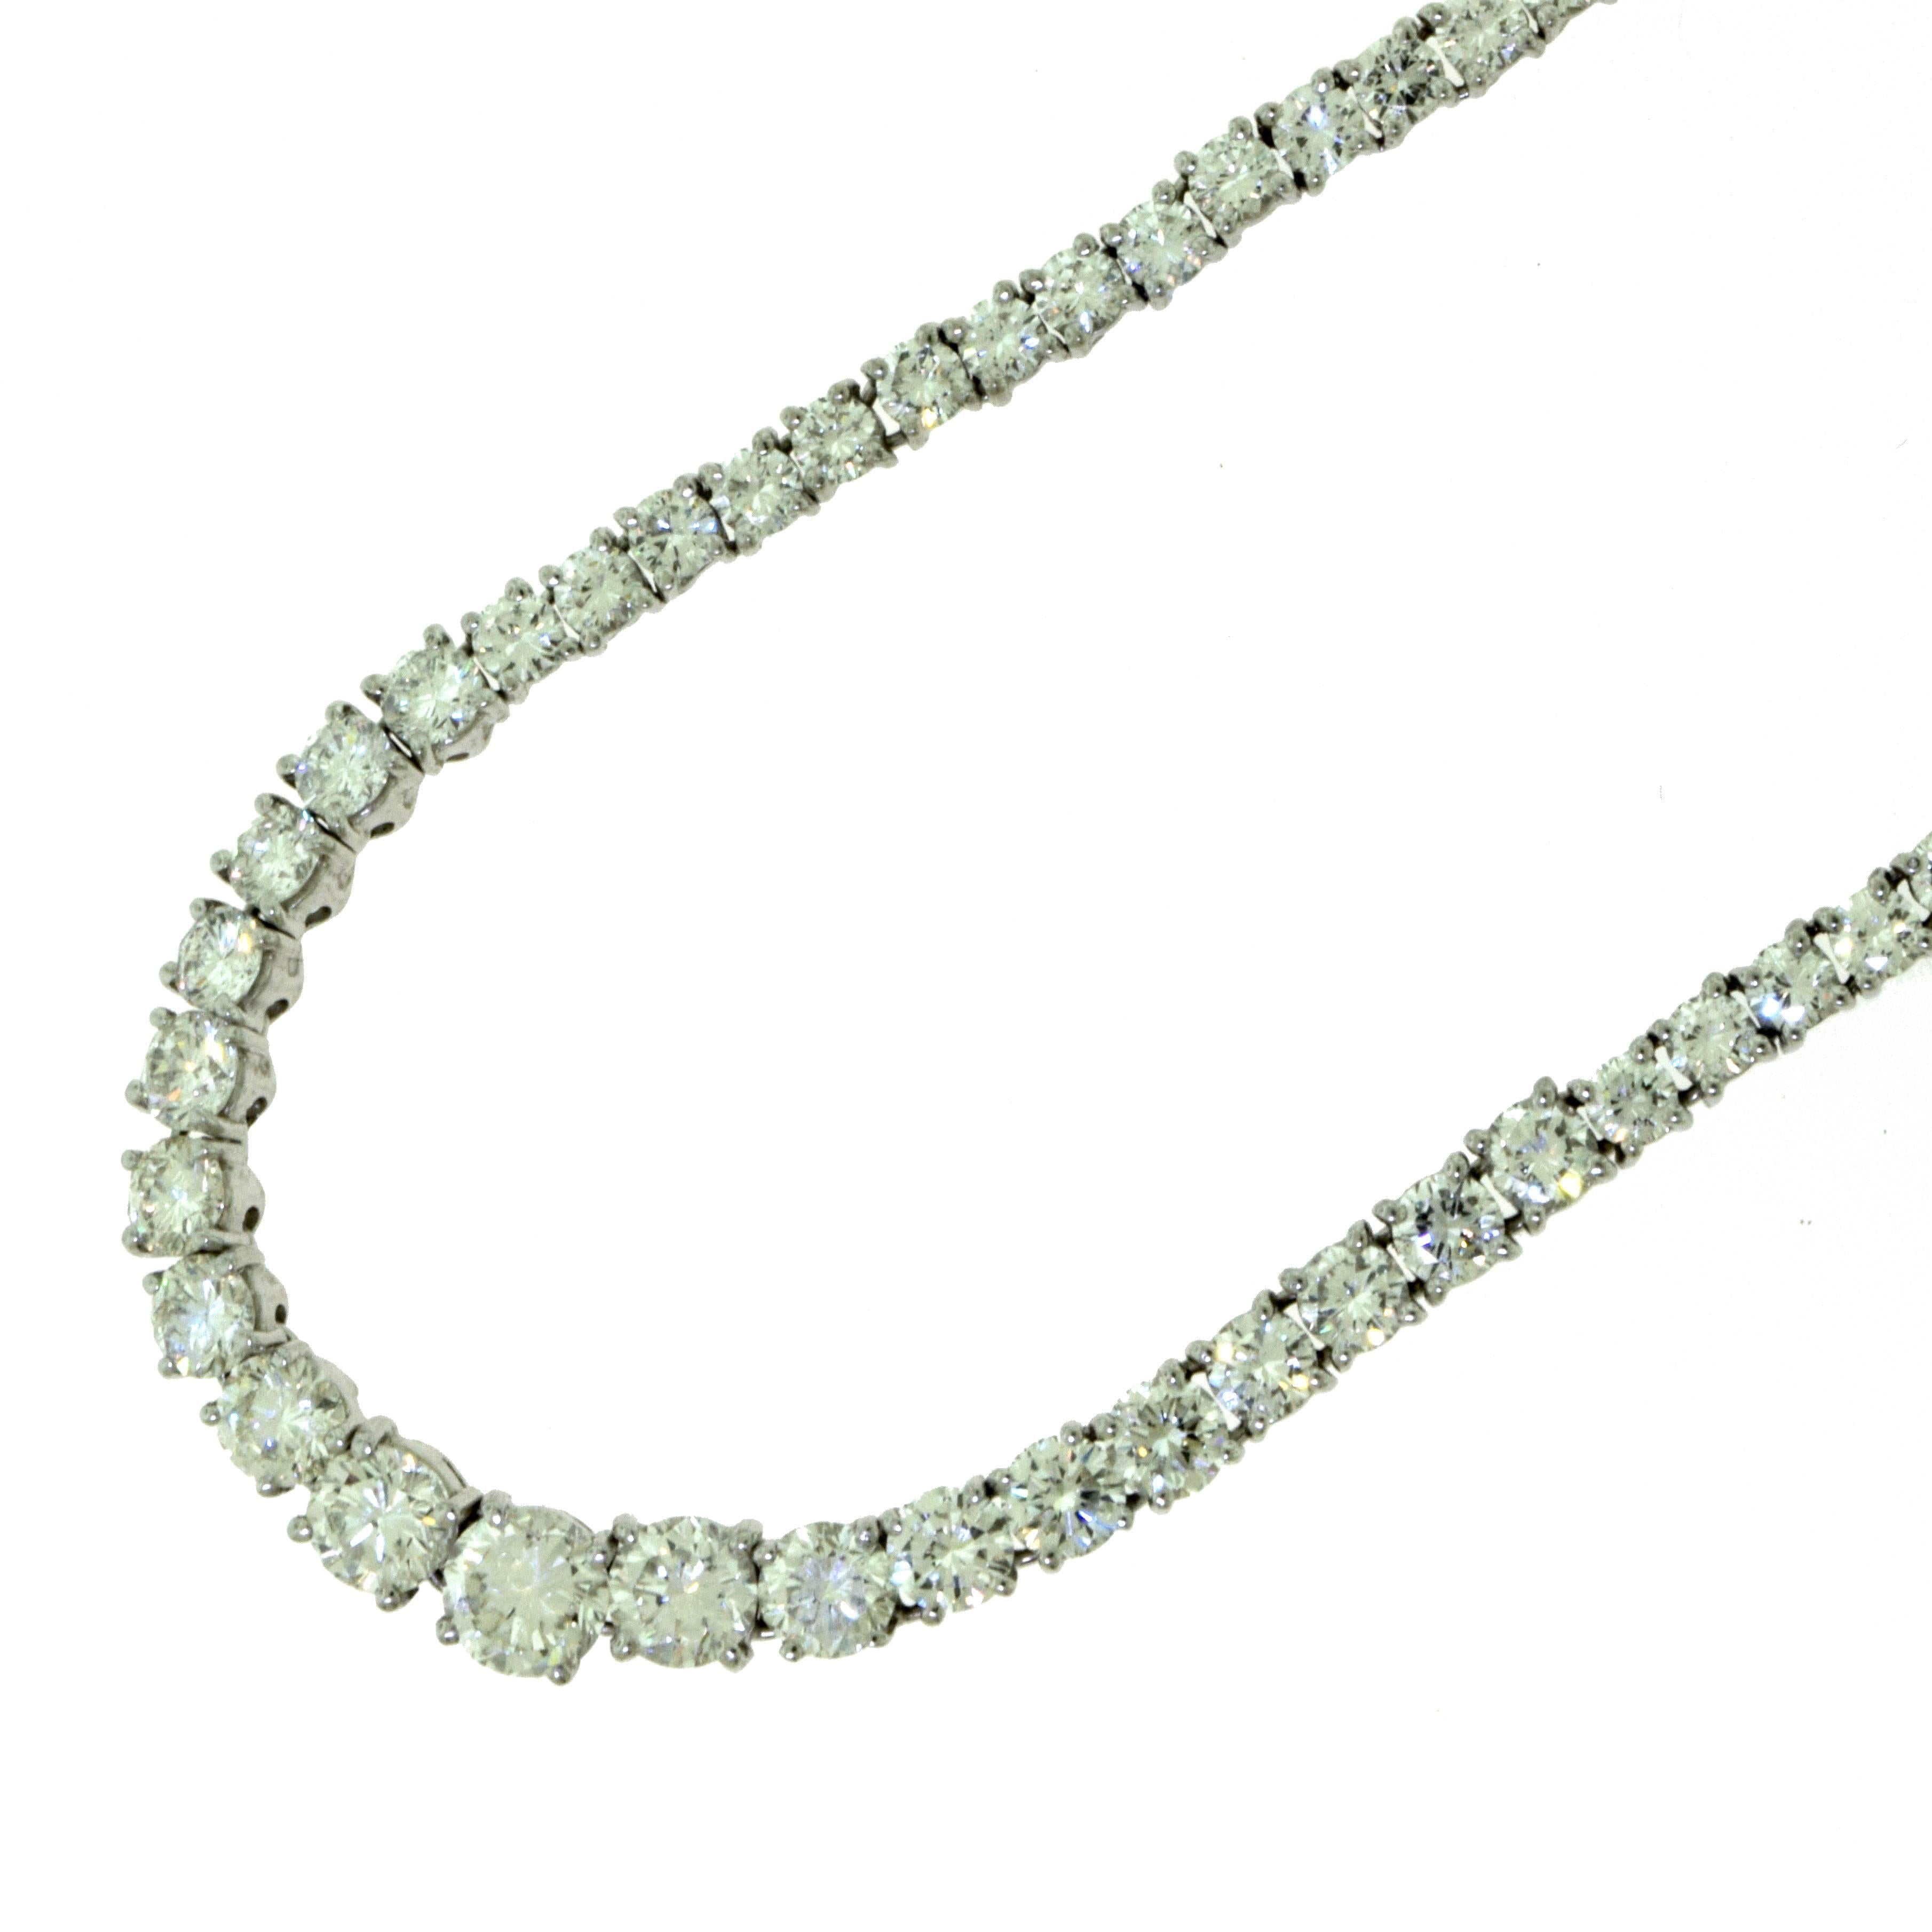 A magnificent variation diamond tennis line necklace by Cartier set in platinum for a total carat weight of 18 carat with diamond color D - E and clarity VVS.

The biggest diamond has a measurement of 6.12 mm and the smallest diamond has a